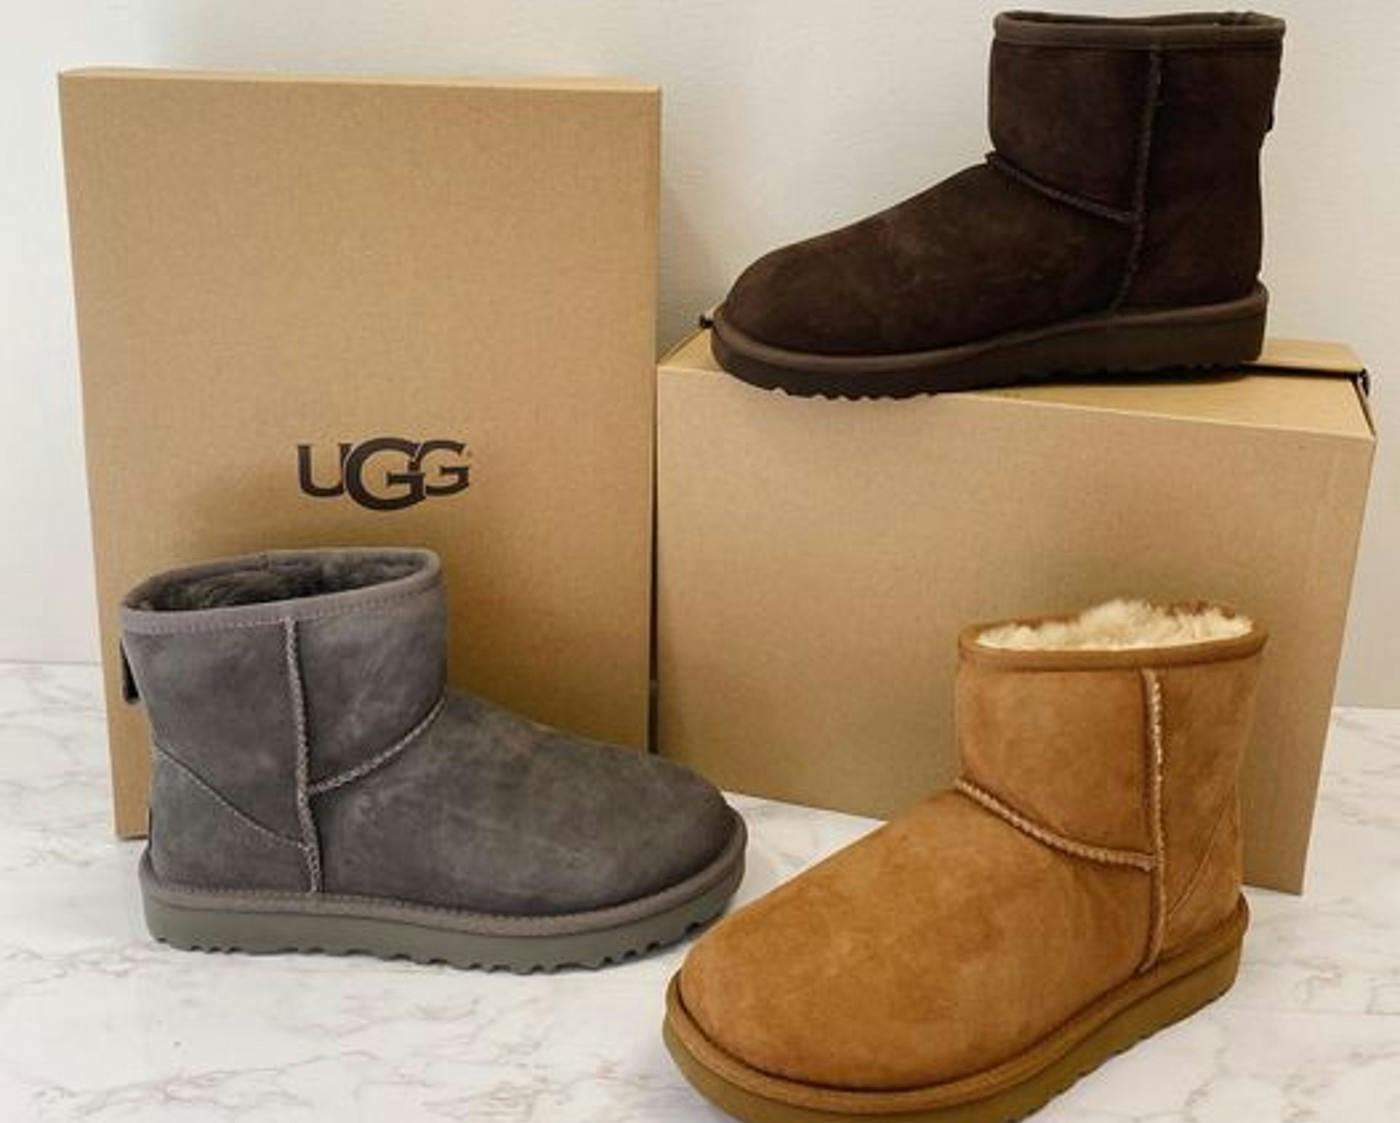 proozy low ugg boots in brown, tan, and gray with boxes